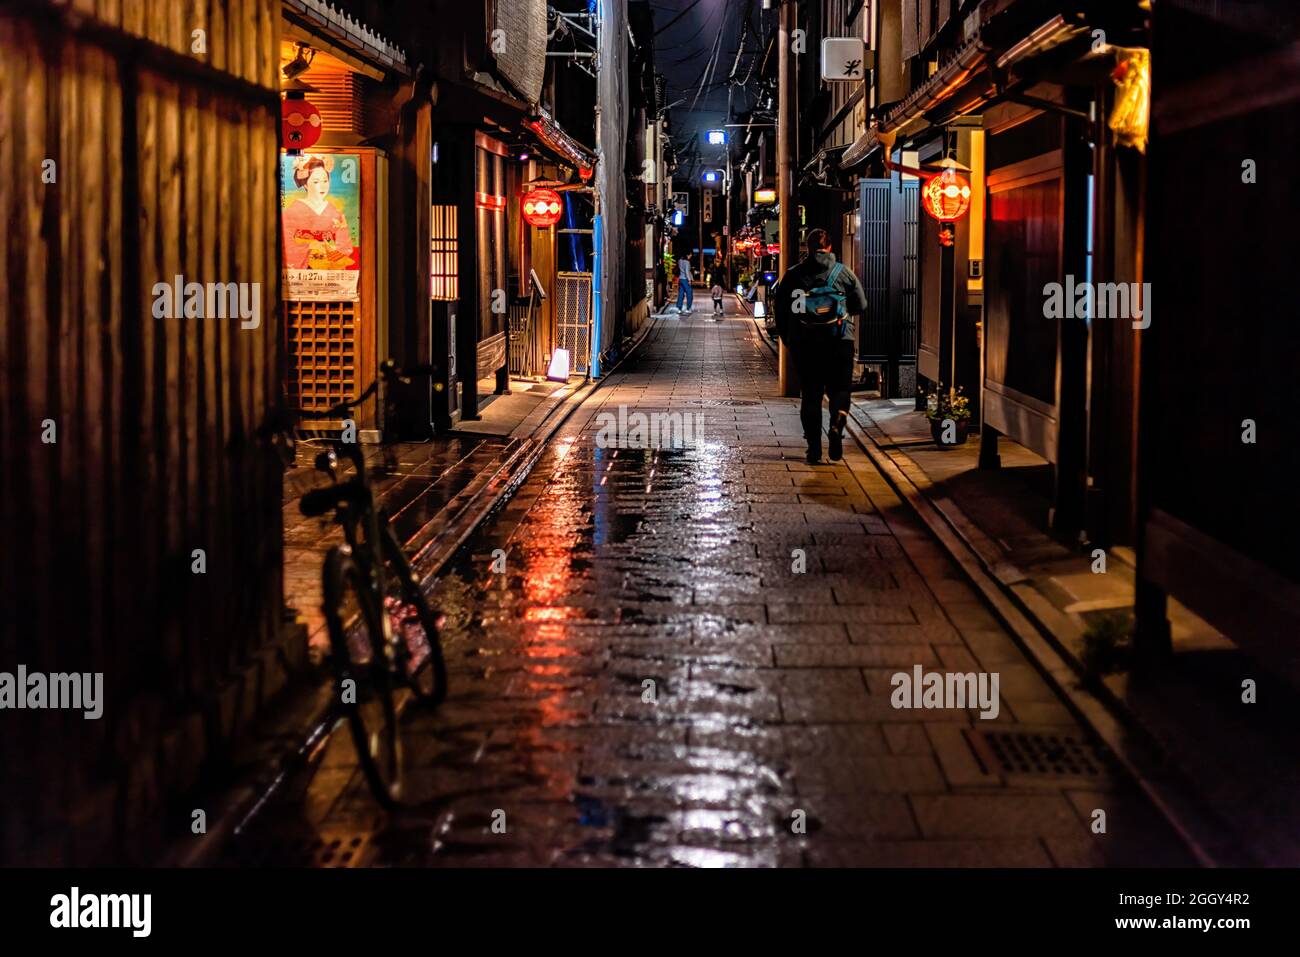 Kyoto, Japan - April 16, 2019: Gion district street alley at night road with reflection after rain and people walking as nightlife and geisha poster Stock Photo